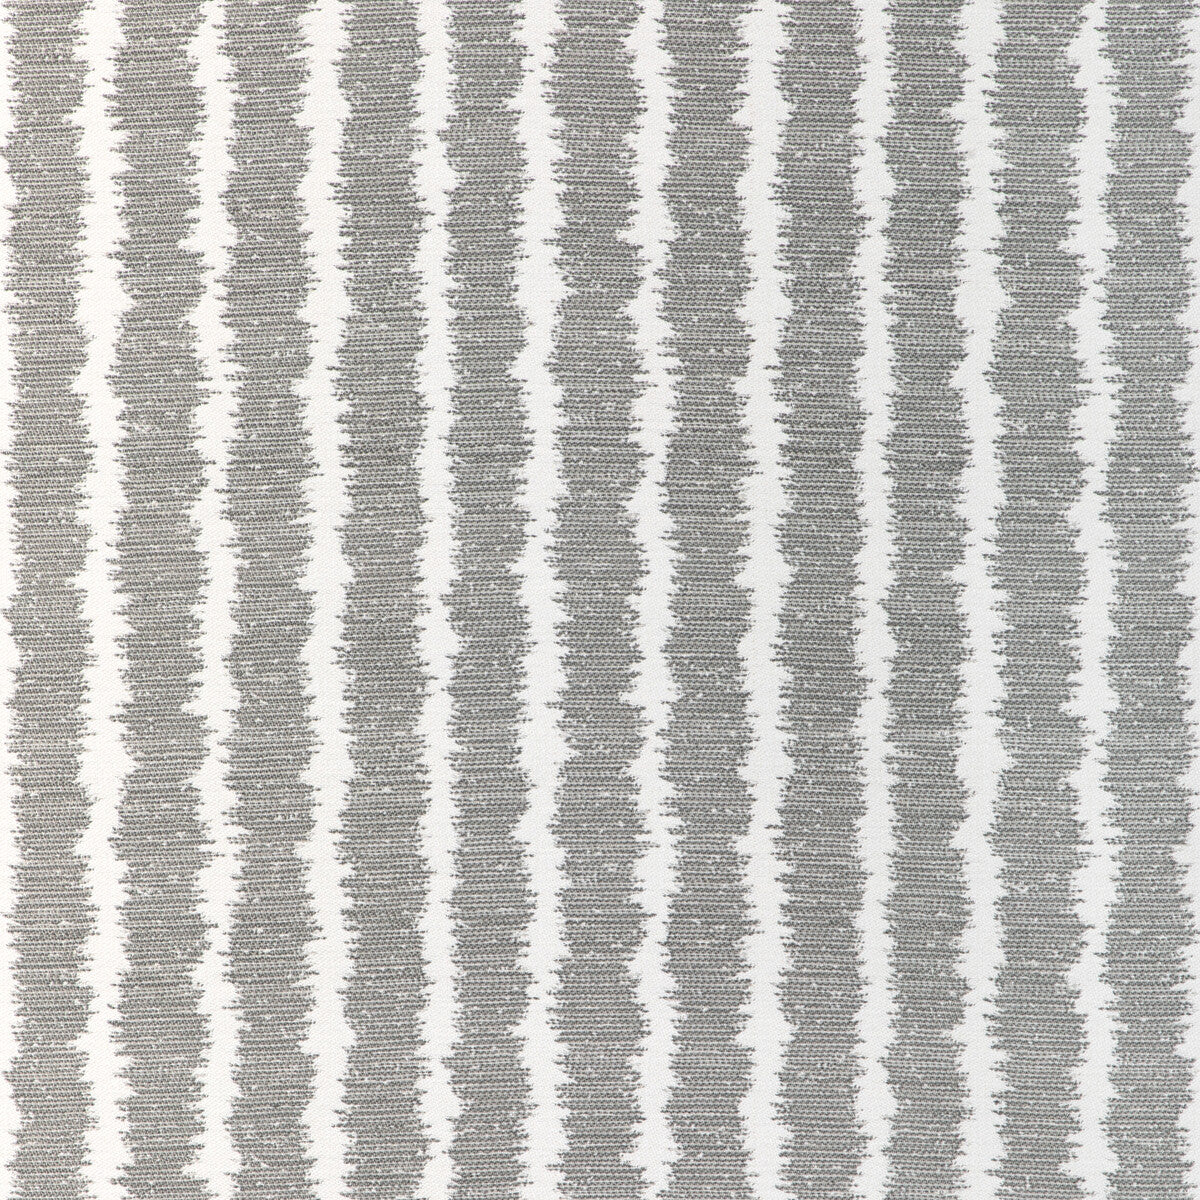 Seaport Stripe fabric in charcoal color - pattern 36917.21.0 - by Kravet Couture in the Riviera collection